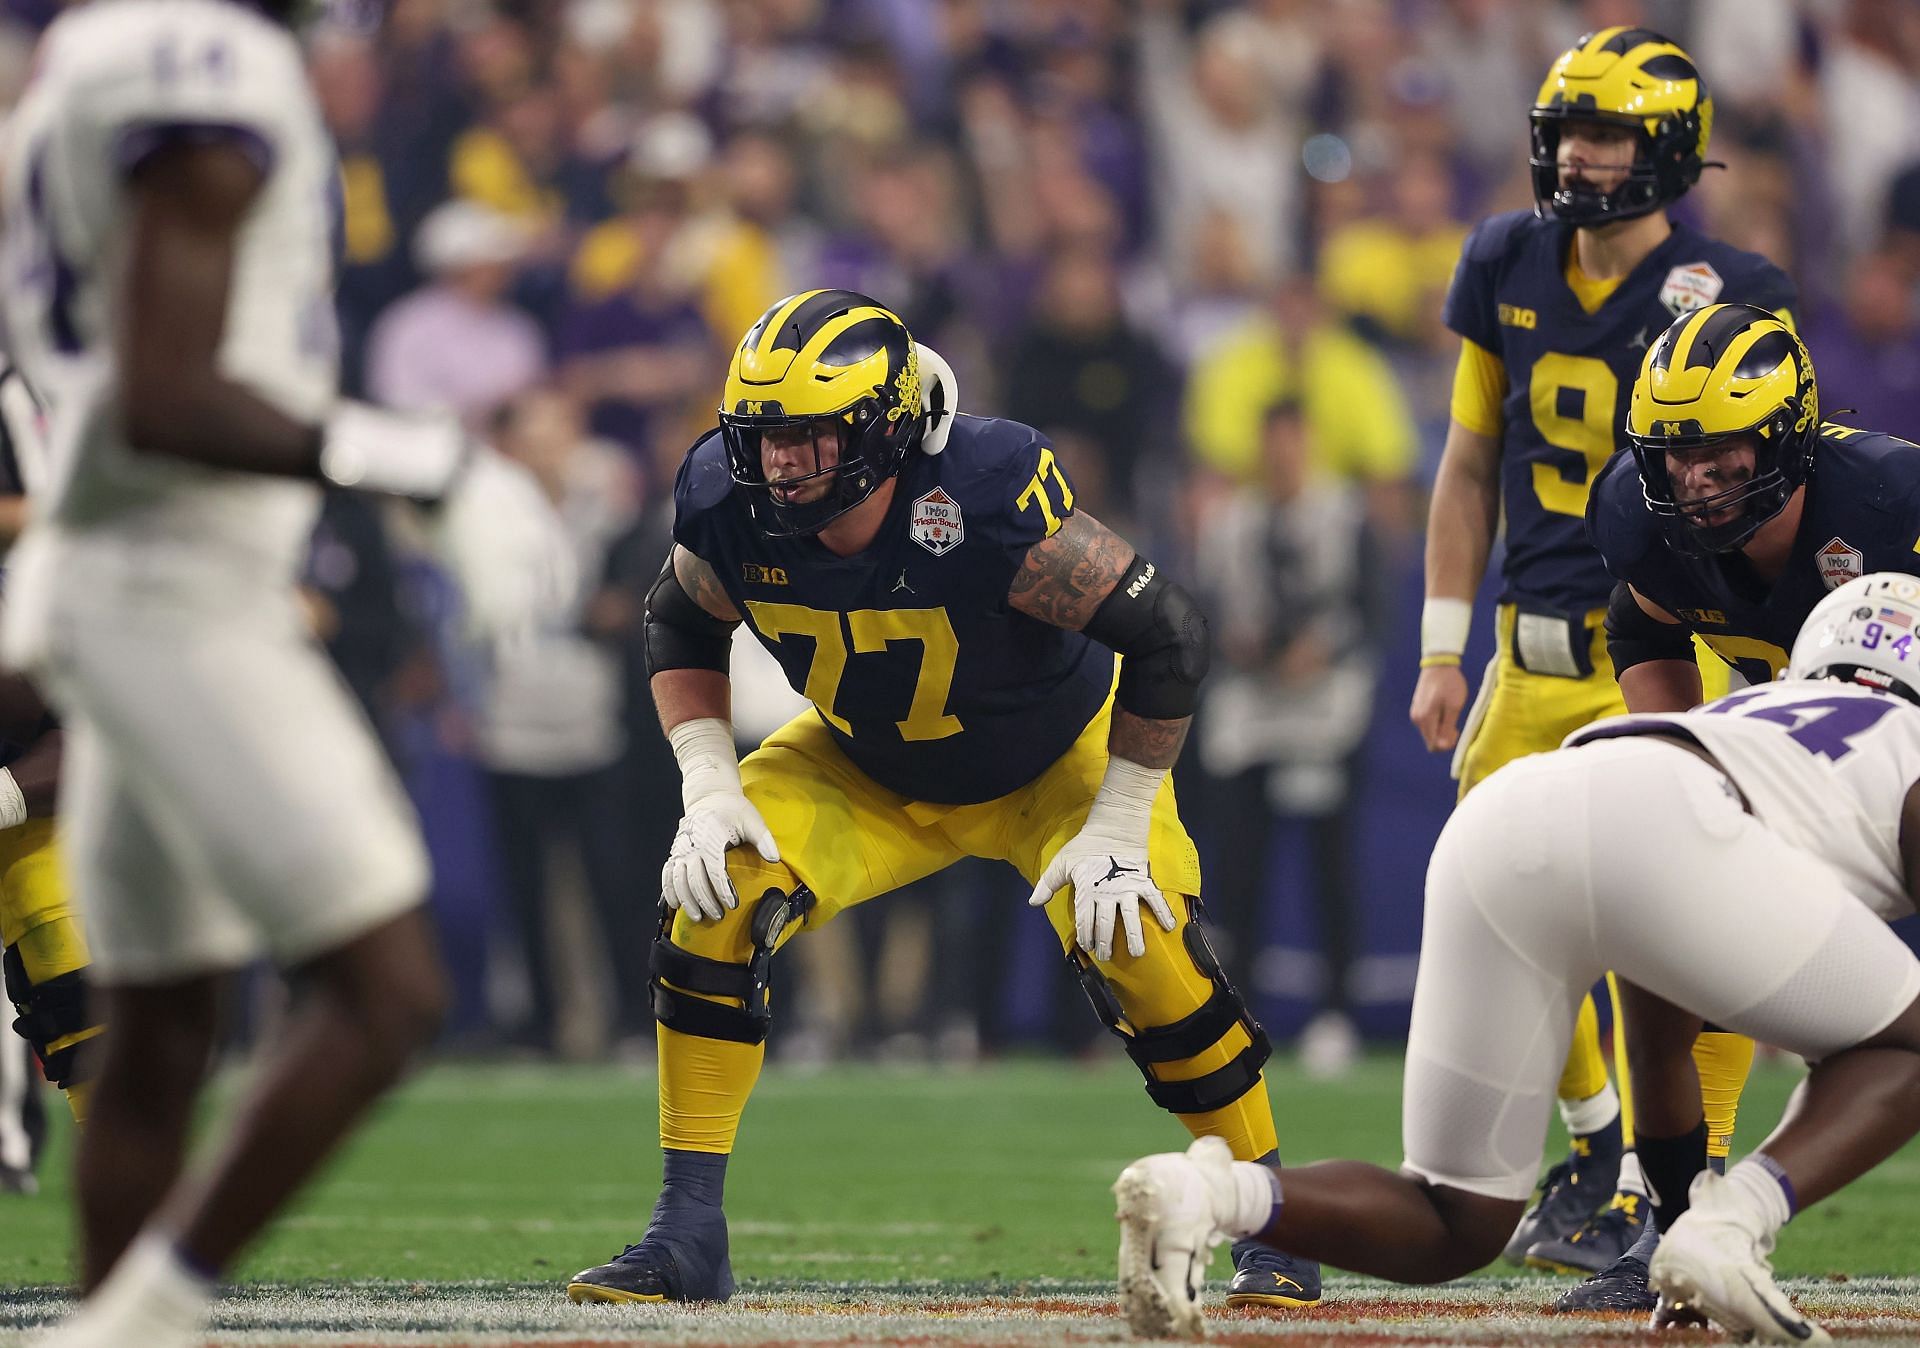 Michigan NCAAF Transfer Portal rankings: How have the Wolverines fared in the portal?